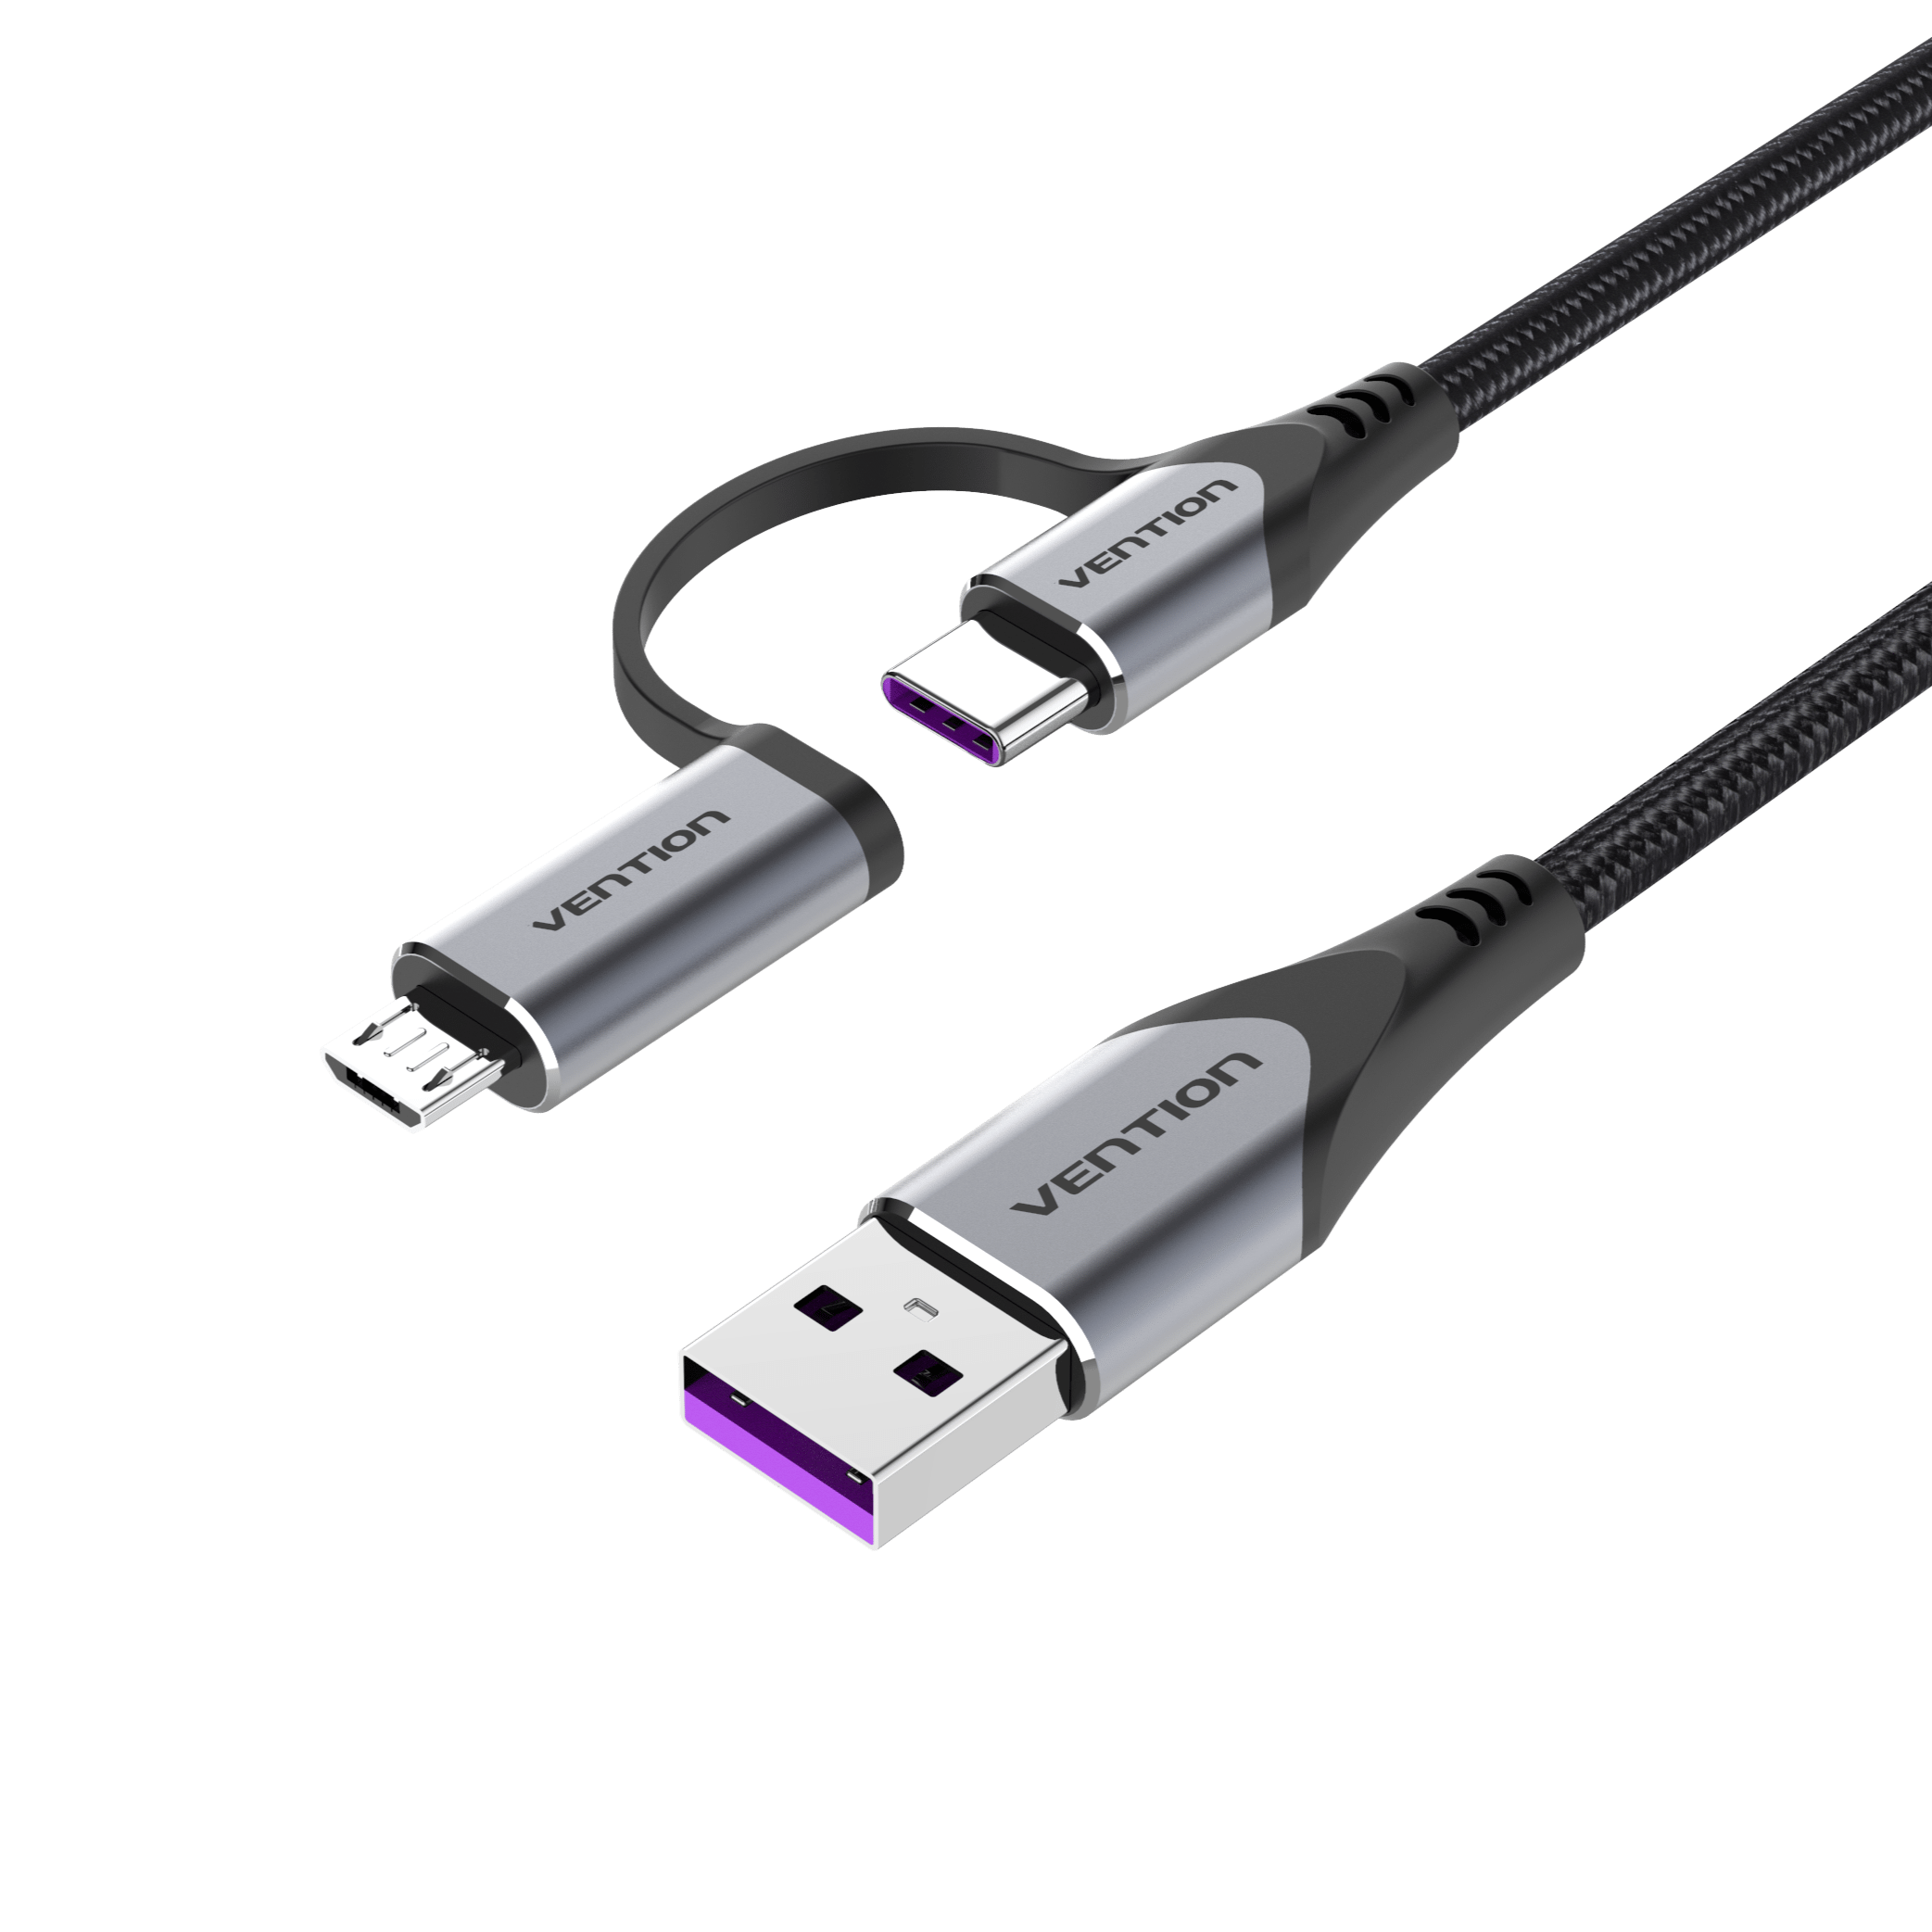 Chargeur Original Rapide + cable Type C pour Huawei P20